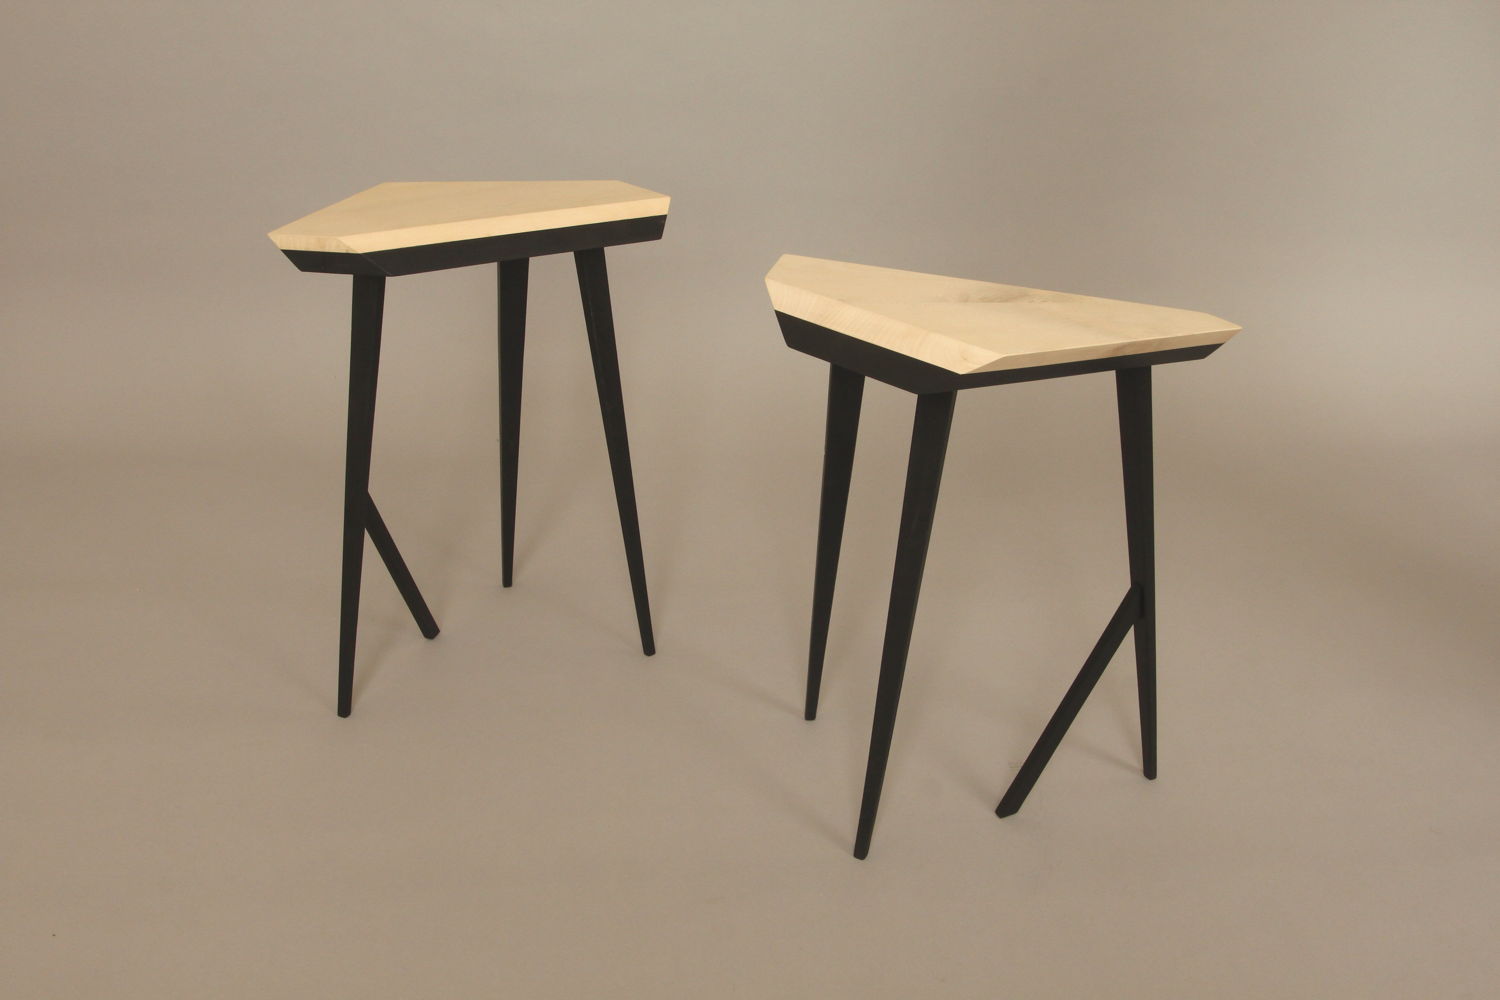 RE, small table. Design: MdSt. Photo: MdSt.